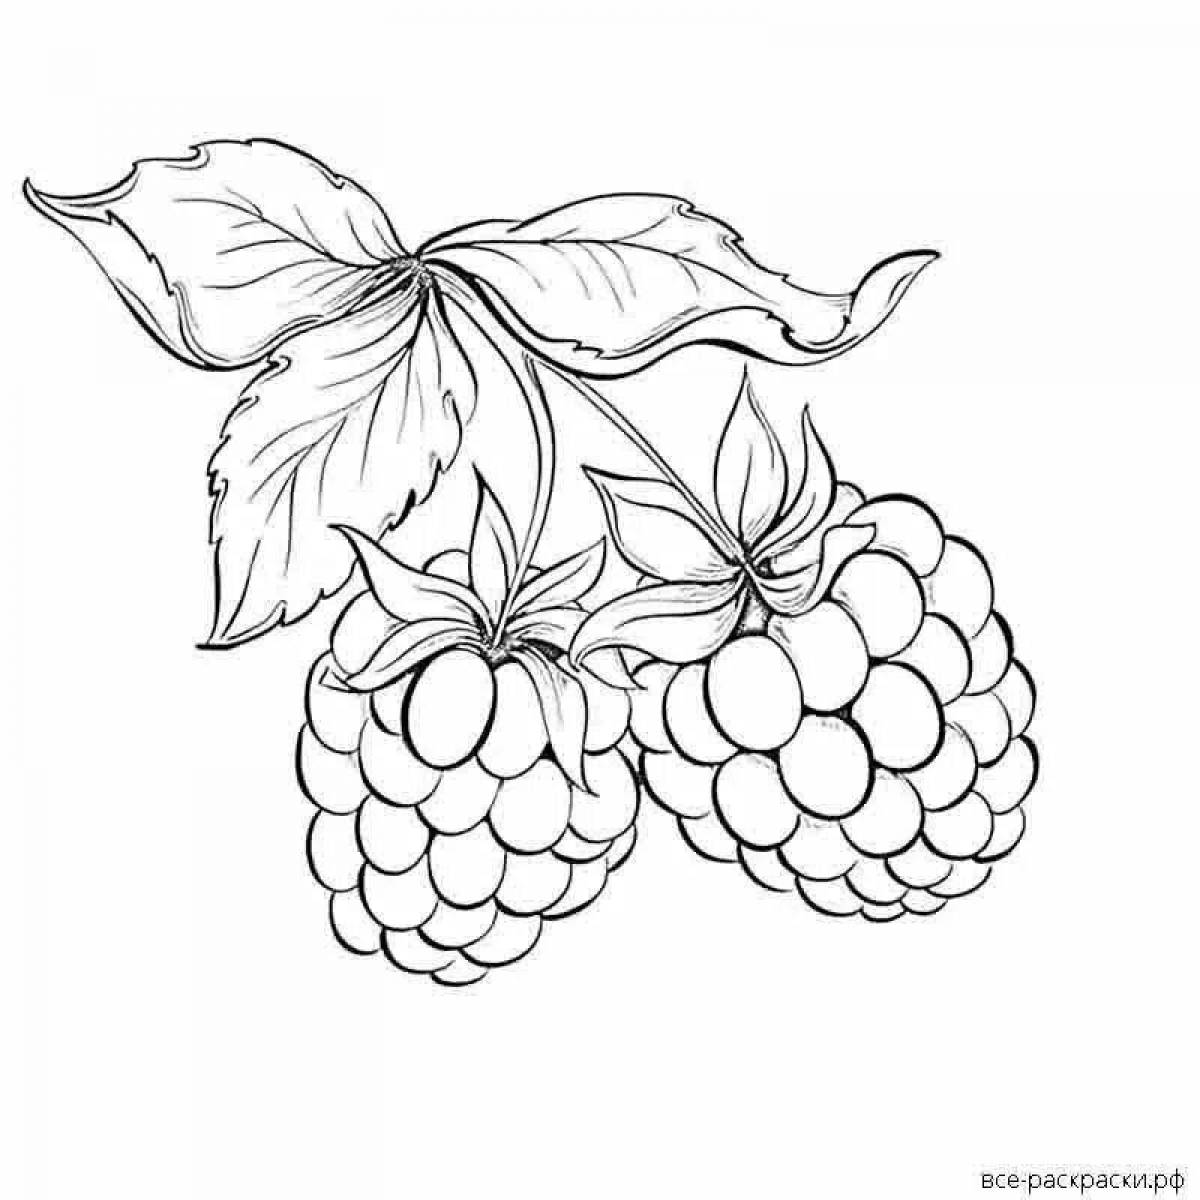 Coloring page nice raspberry